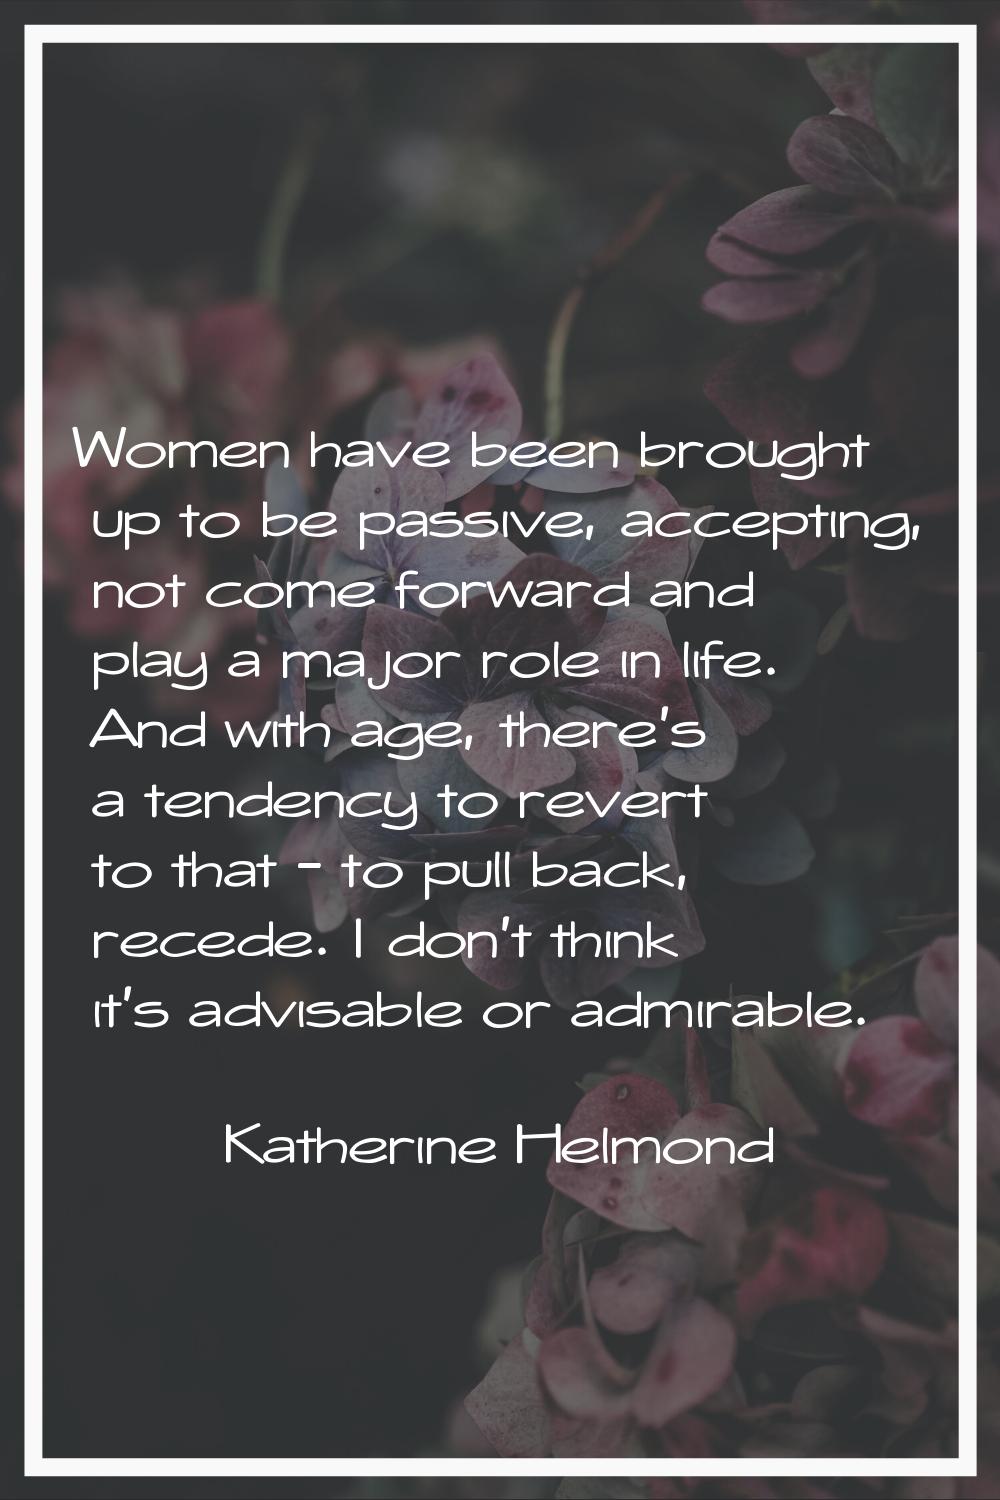 Women have been brought up to be passive, accepting, not come forward and play a major role in life